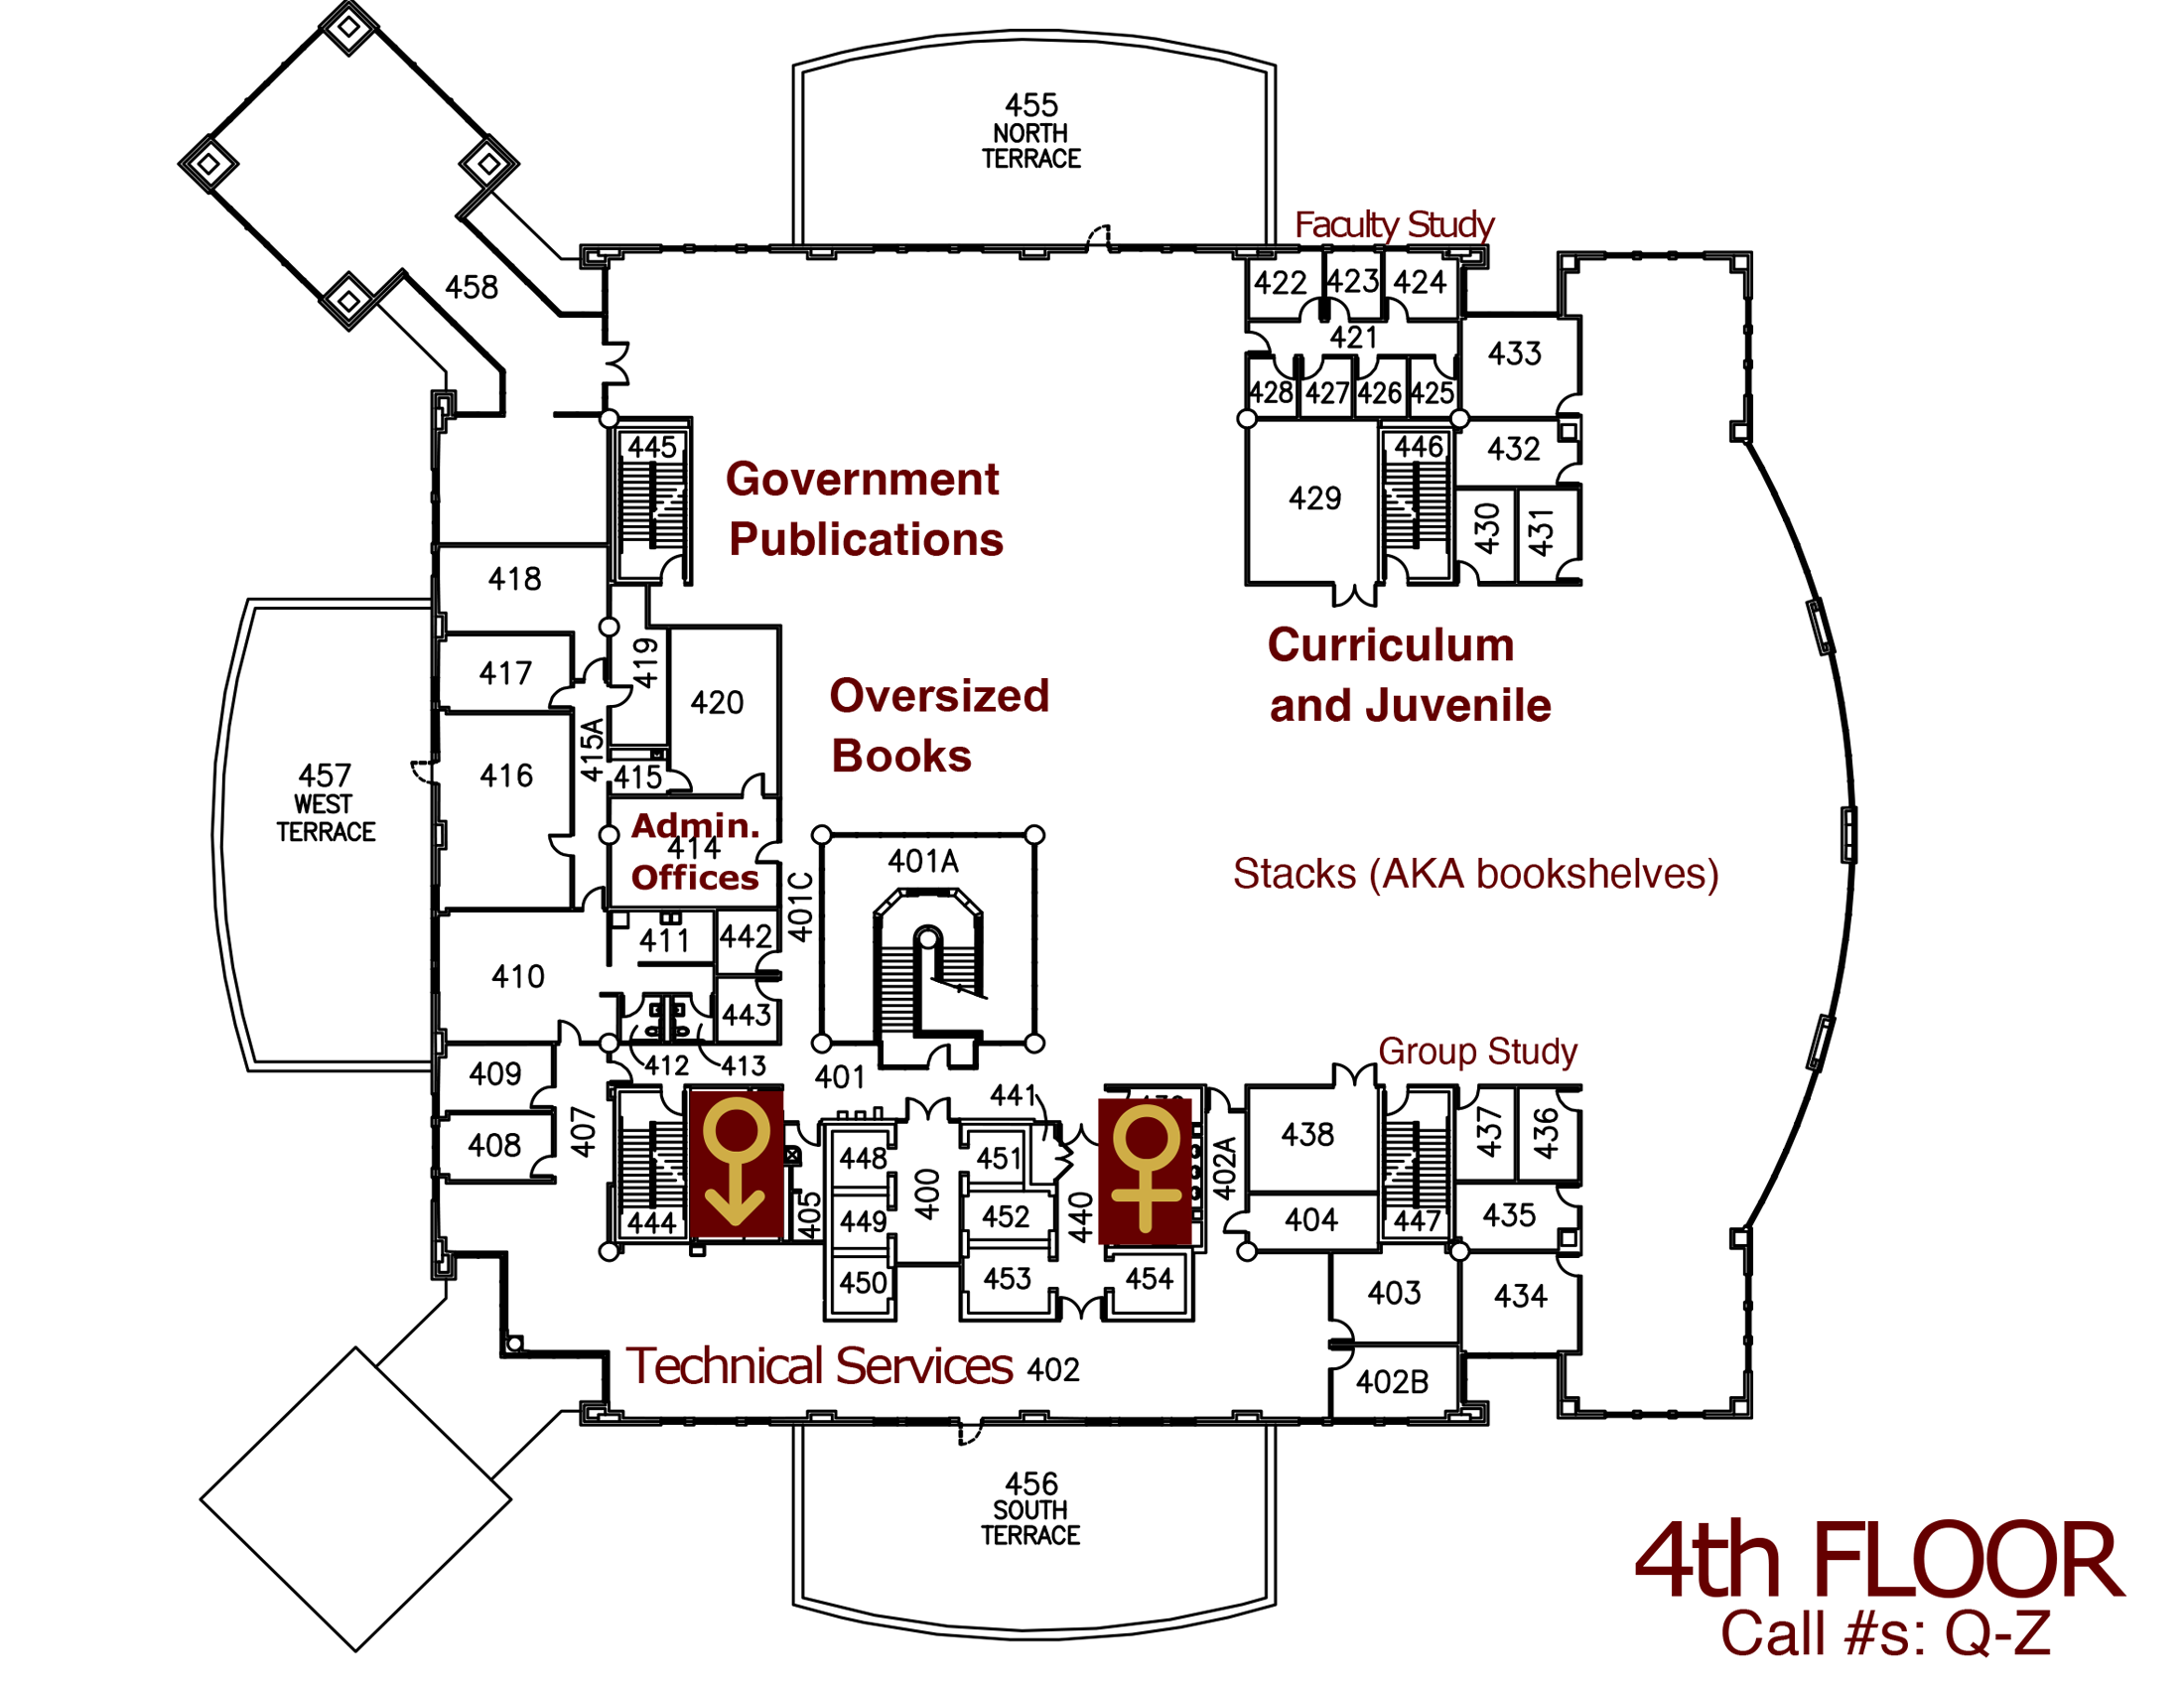 fourth floor library map see text list below